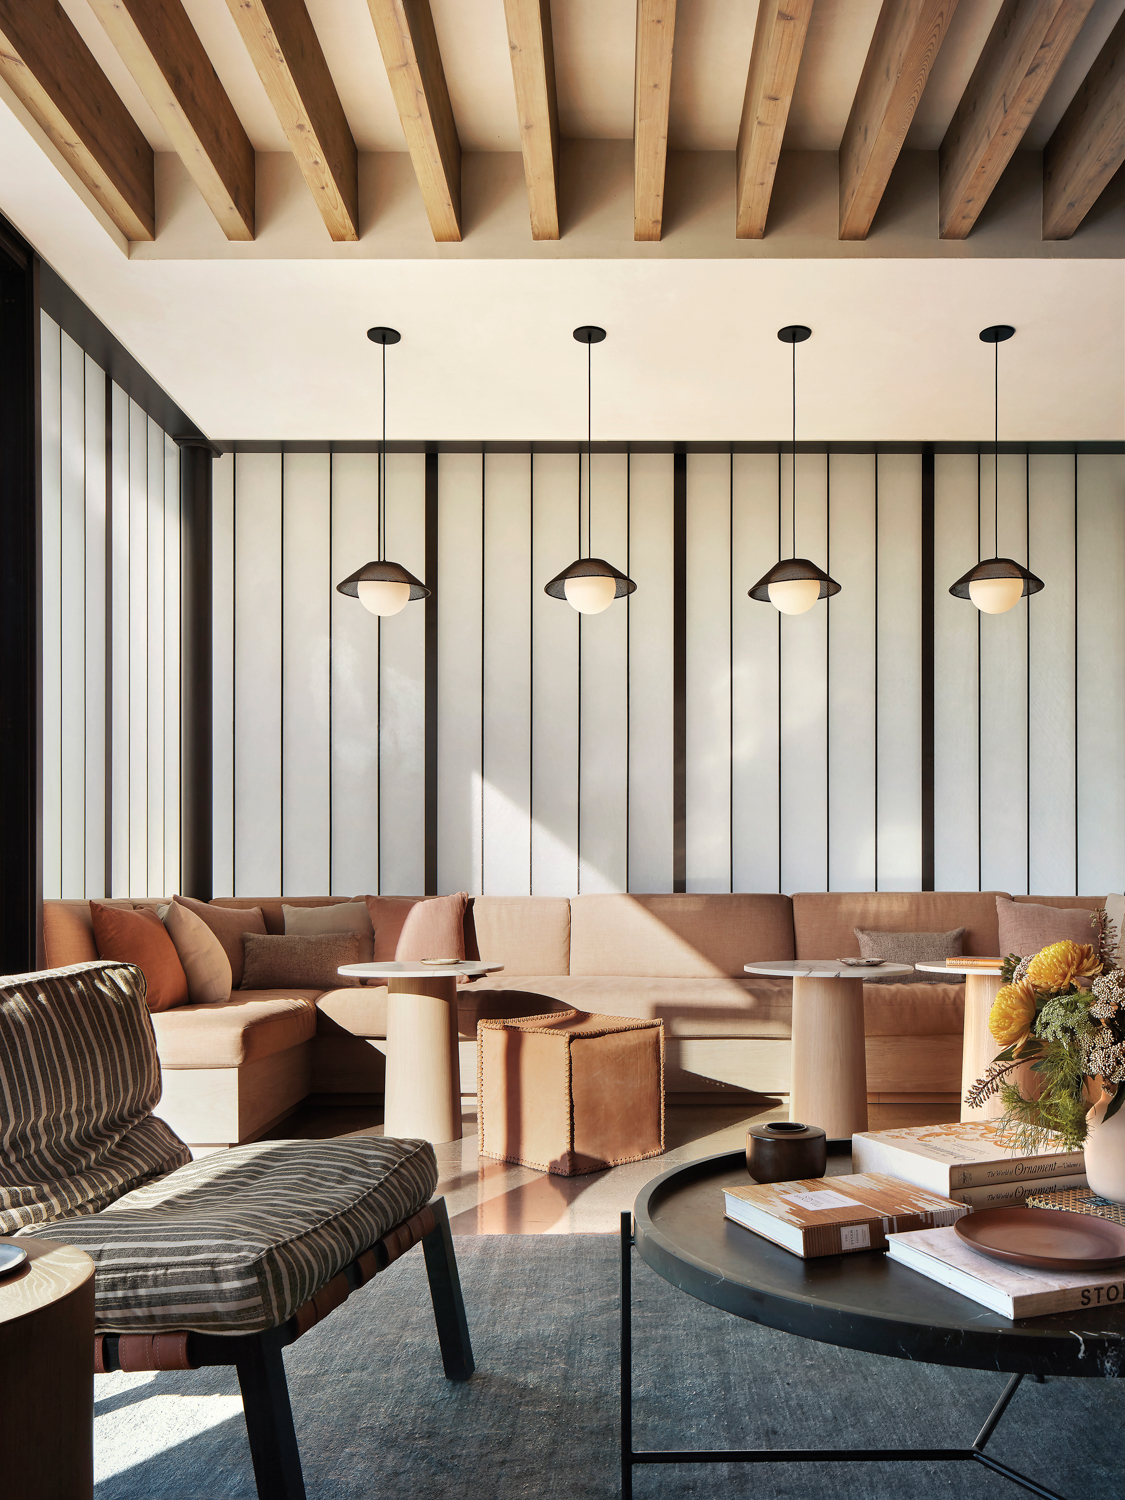 Tasting room with slatted-wood ceiling and banquette seating upholstered in a light-colored fabric.